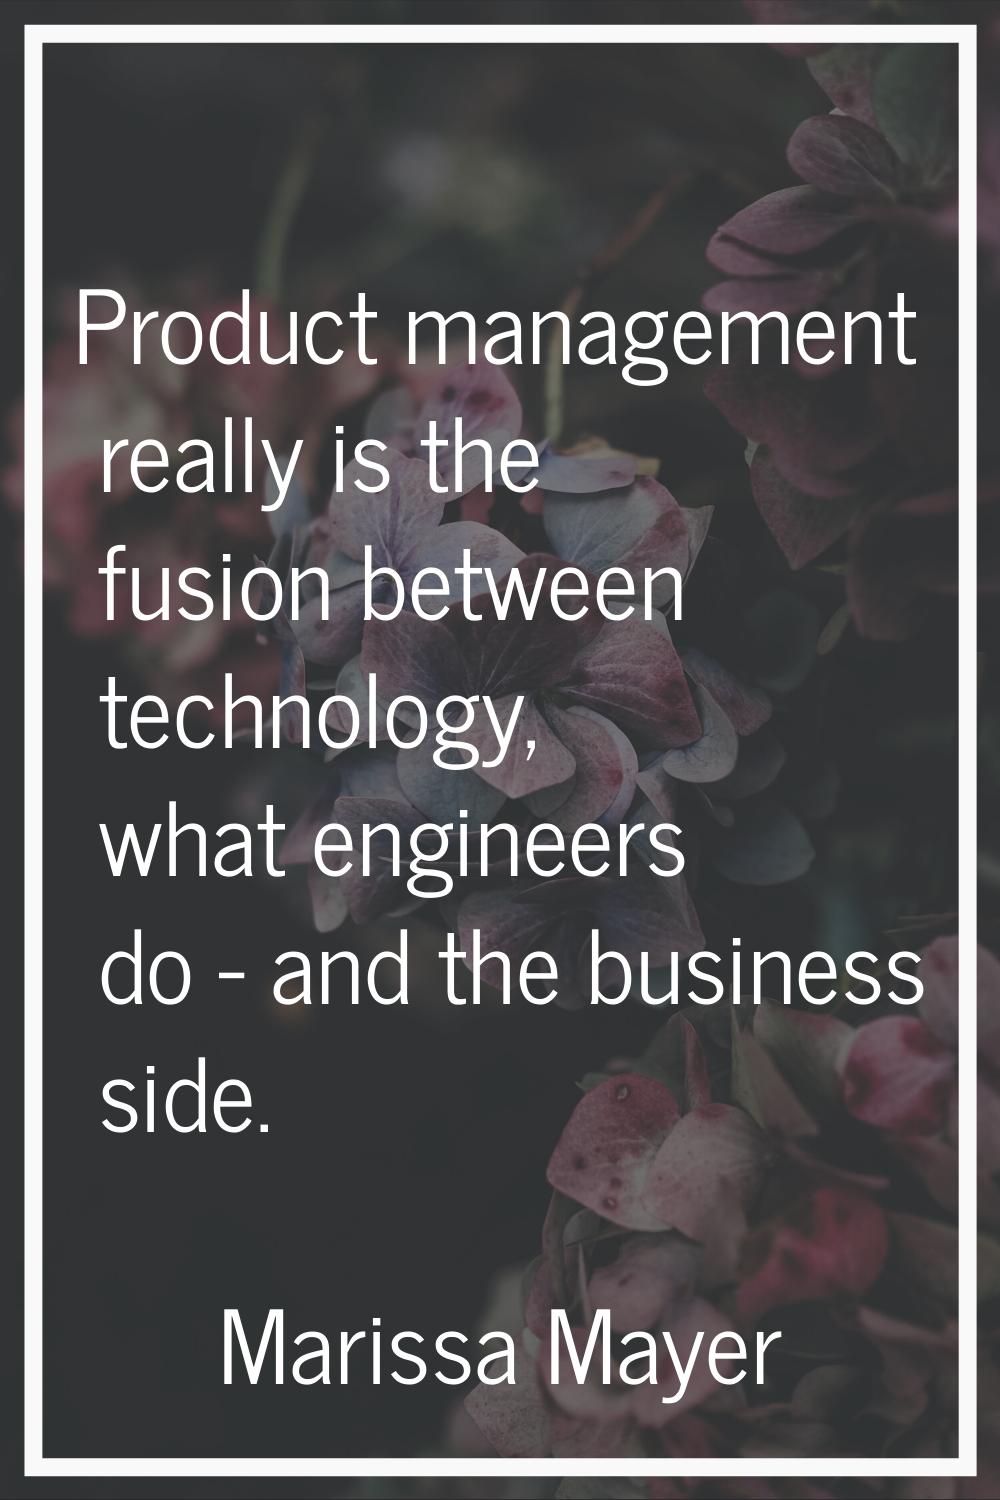 Product management really is the fusion between technology, what engineers do - and the business si